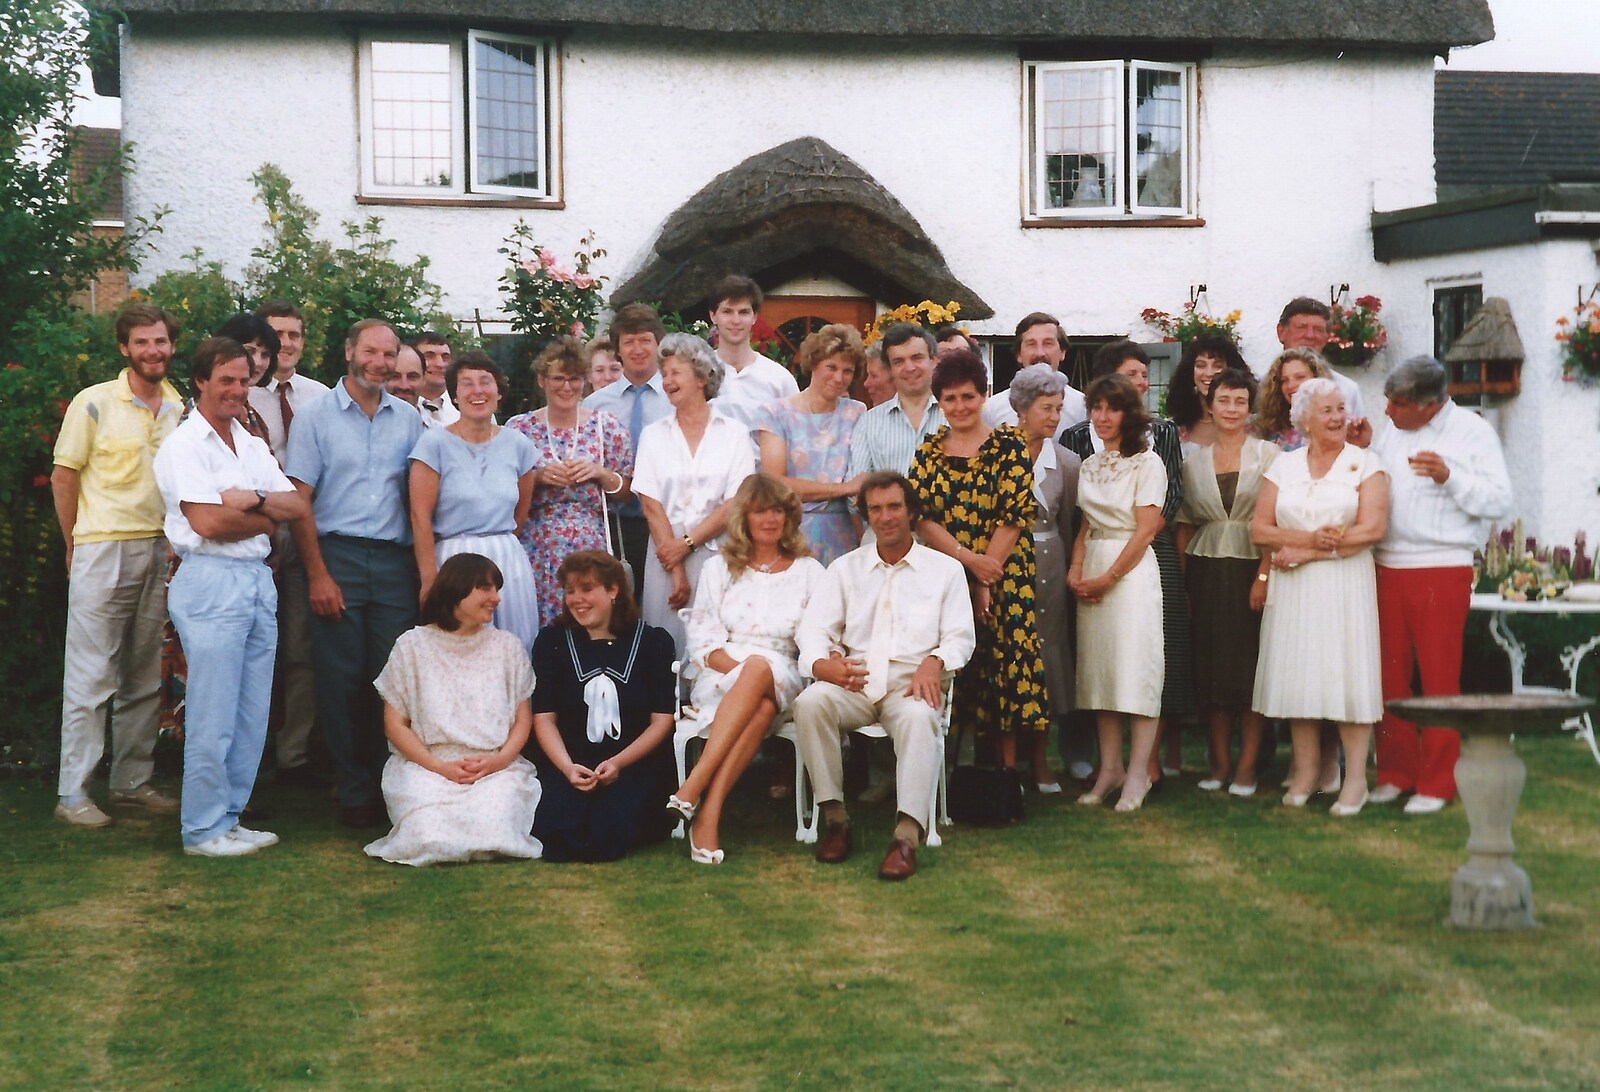 A big group photo from Mother and Mike's Wedding Reception, Bransgore, Dorset - 20th August 1988